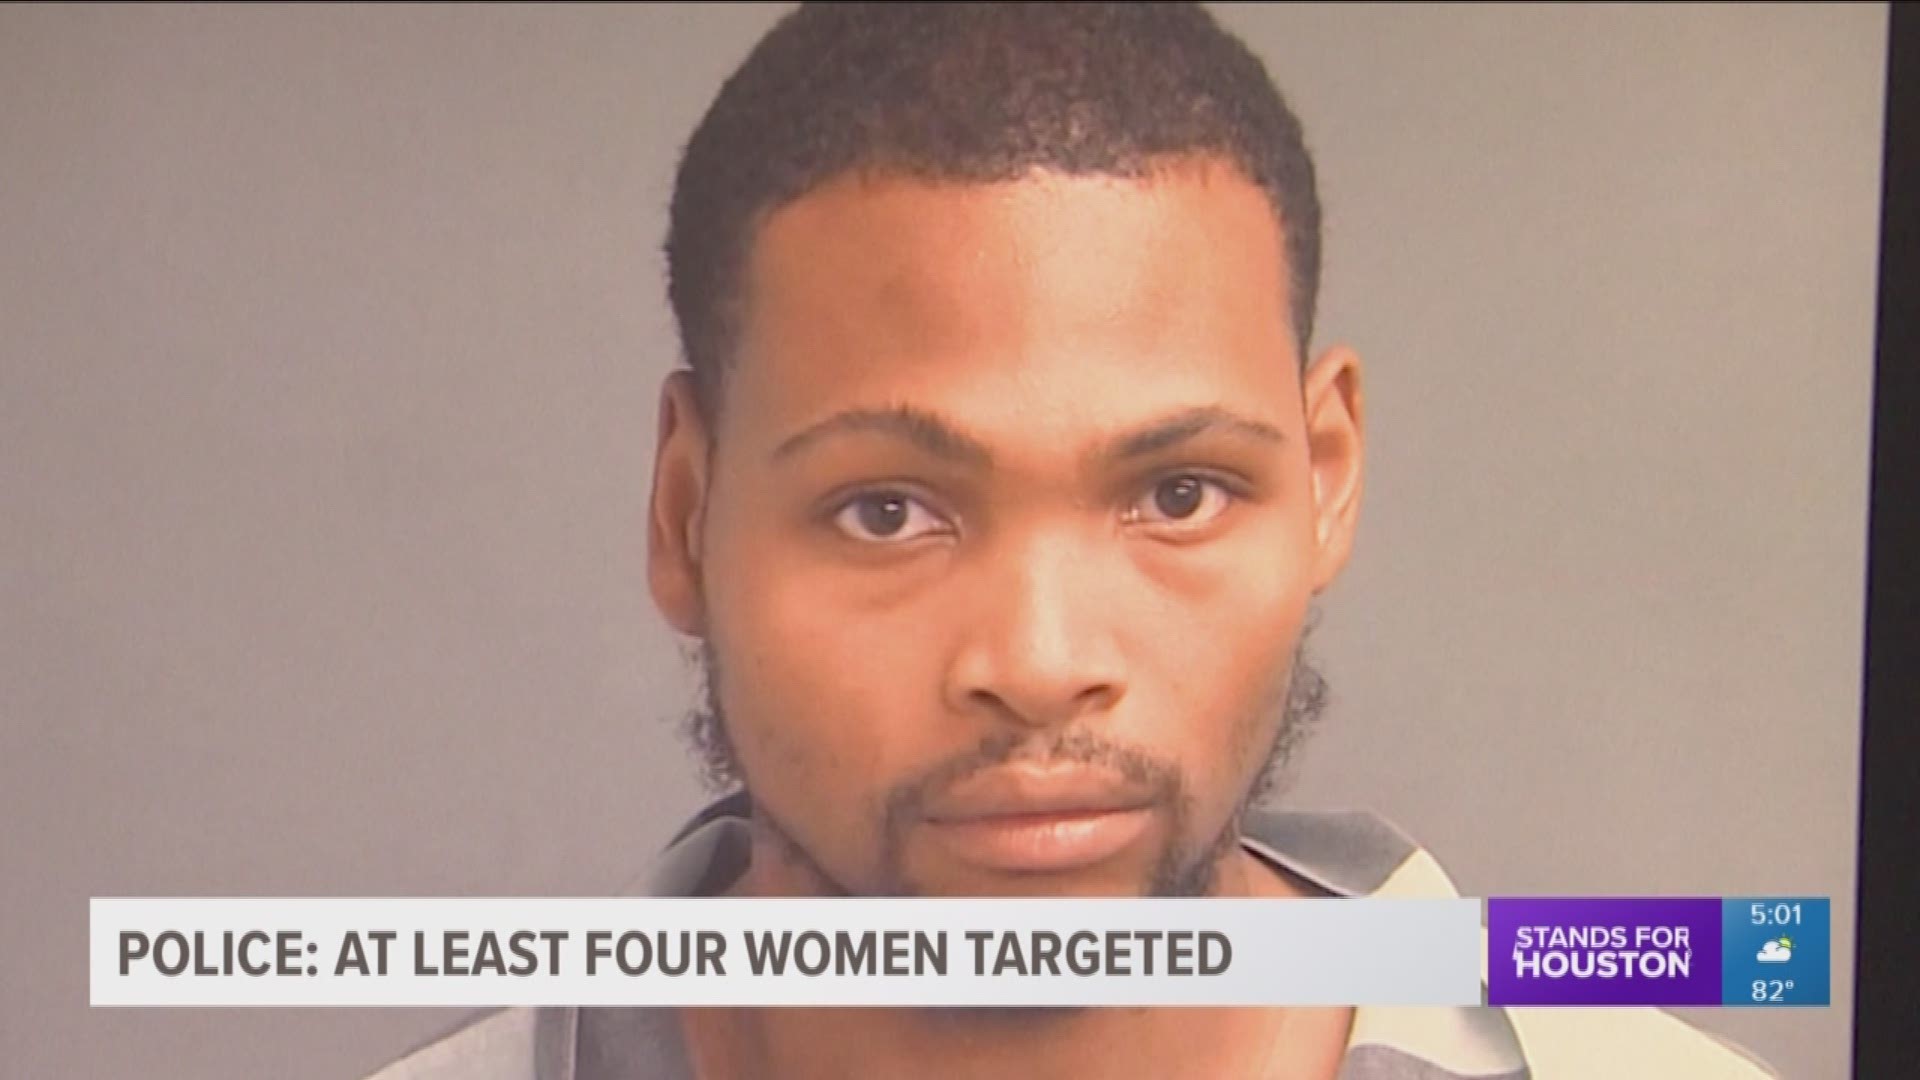 A man has been arrested after he attempted to kidnap four women and sexually assaulted two of them, according to the Harris County Sheriff's Office. 